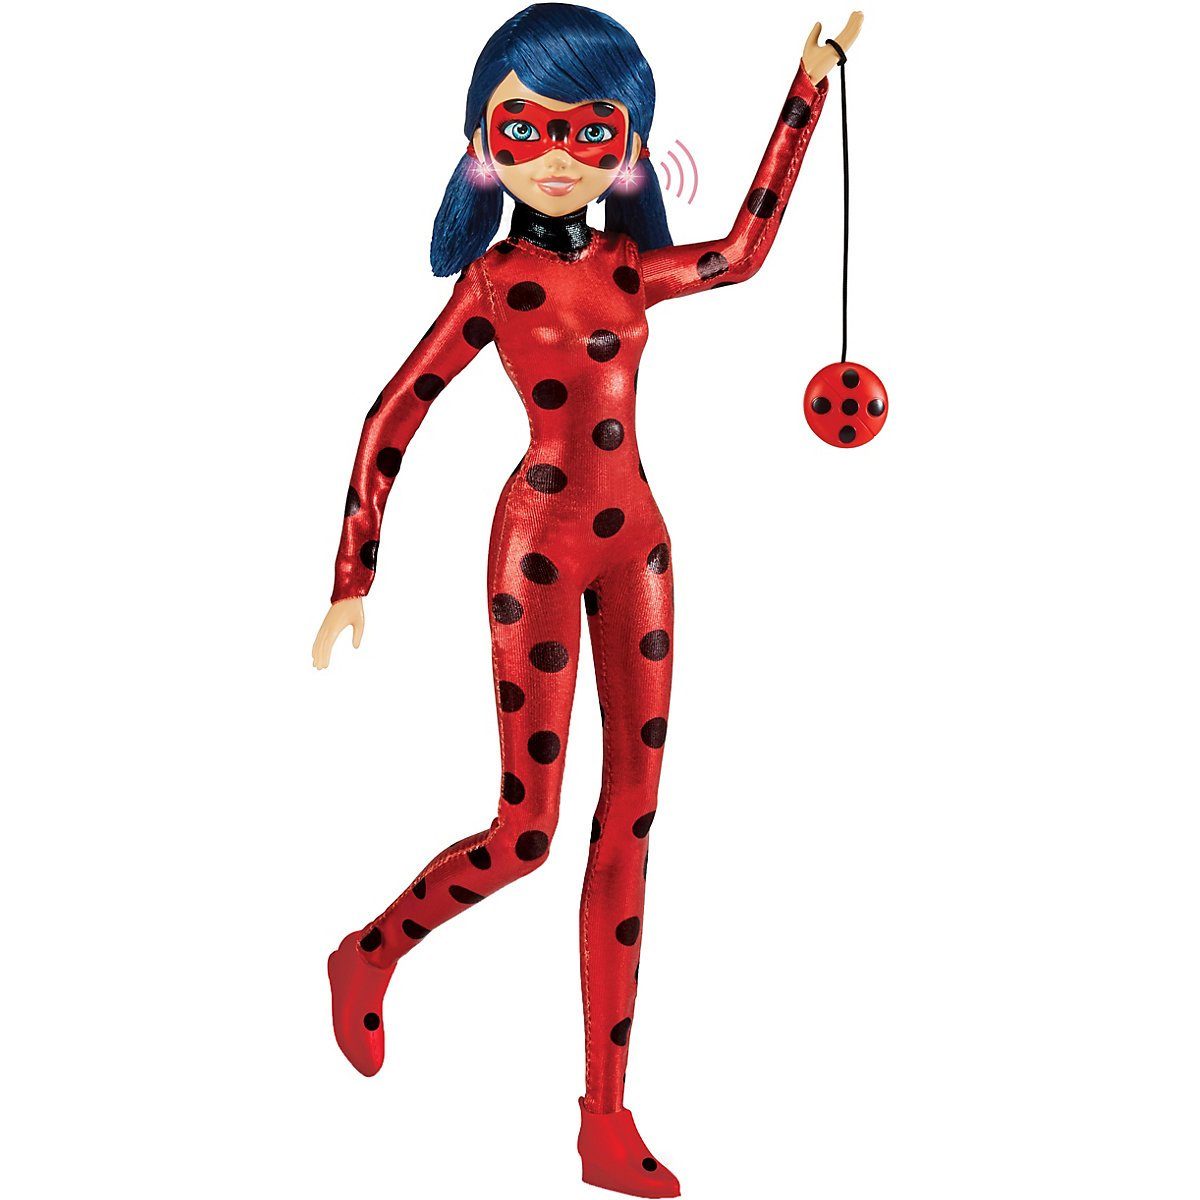 BANDAI NAMCO Stehpuppe Miraculous Puppe 26 cm mit Funktionen